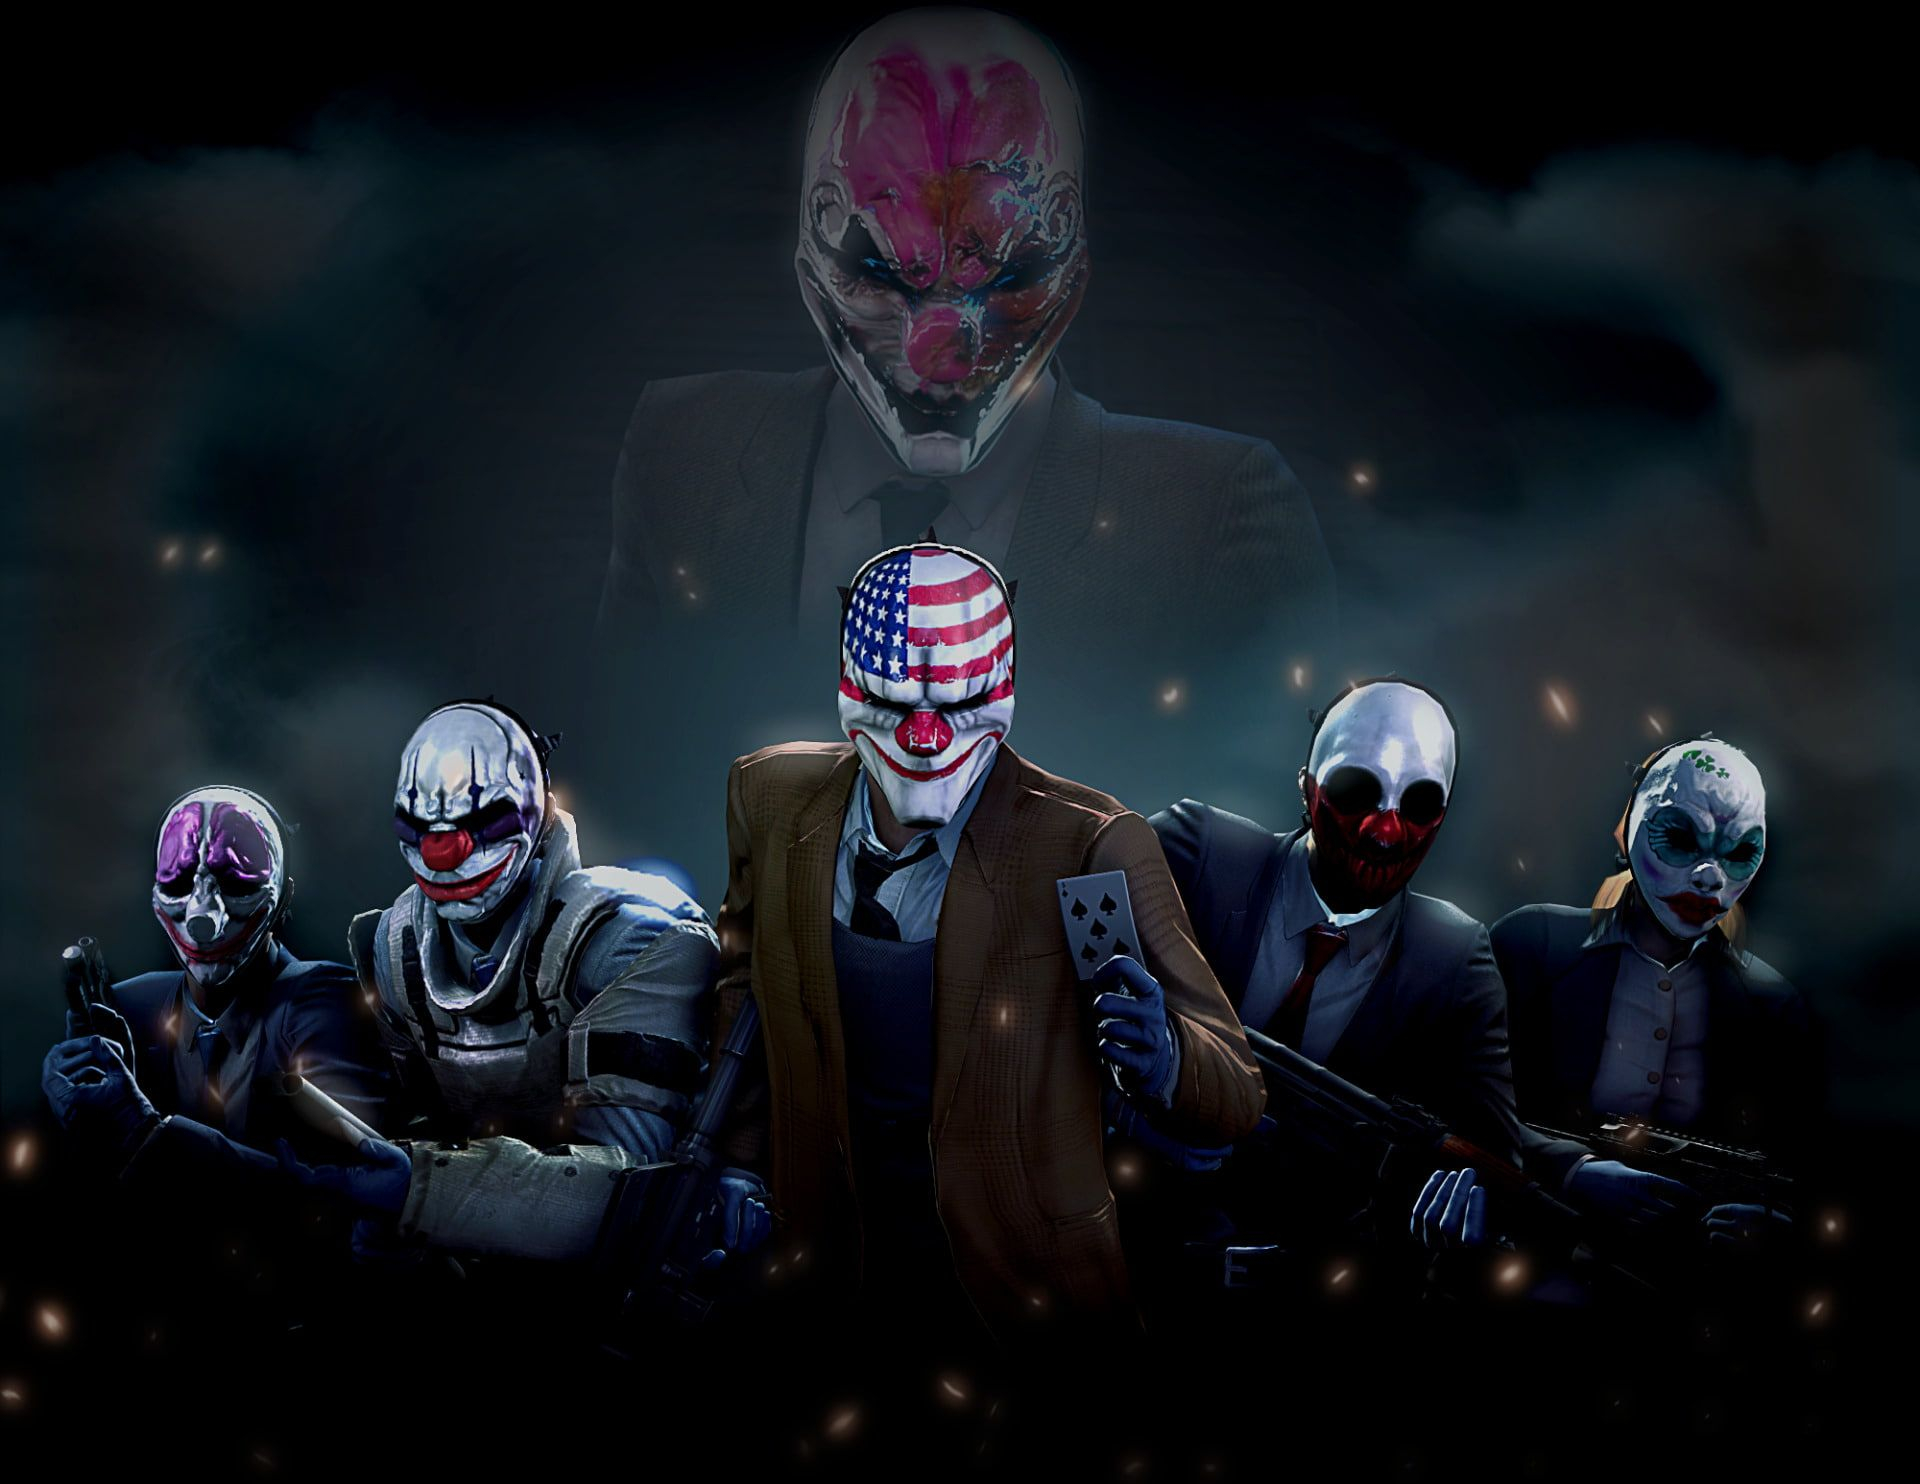 1920x1484 Payday Payday 2 Chains (Payday) Clover (Payday) Dallas (Payday) Houston ( Payday) Hoxton (Payday) Wolf (Payday) #1080P #wallpaper&acirc;&#128;&brvbar; | Chains payday, Payday 2, Payday